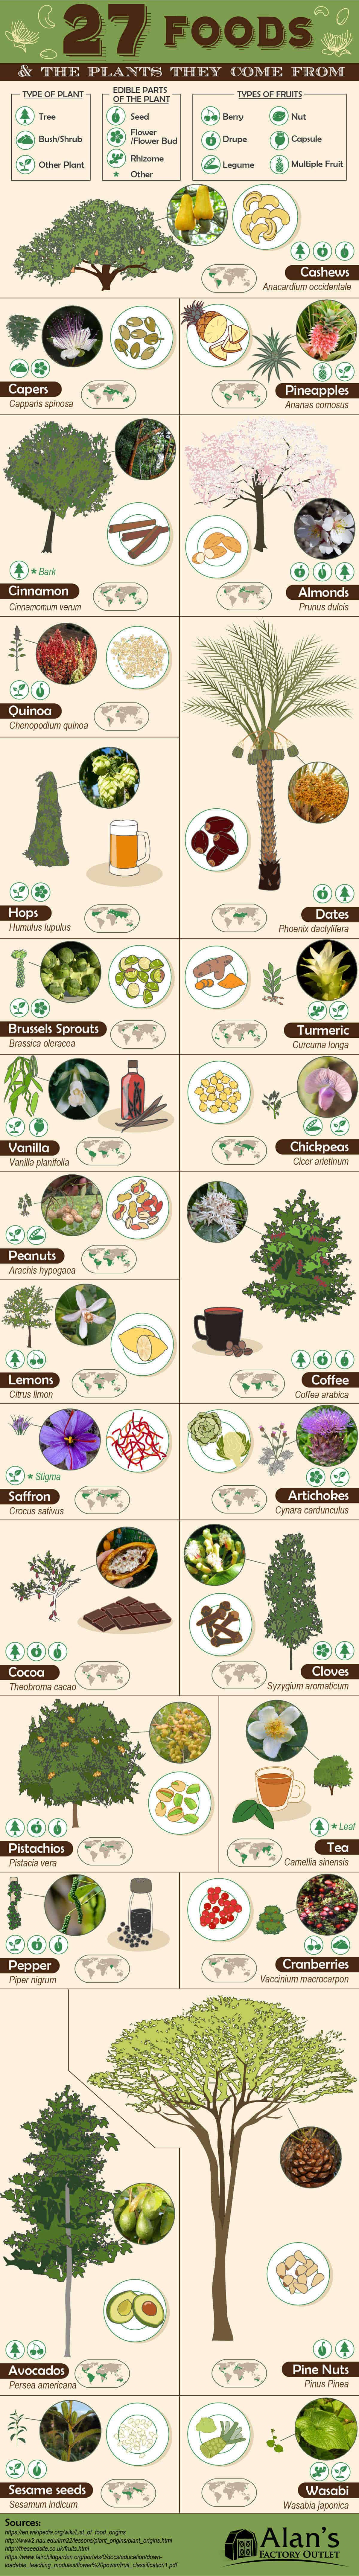 27 Foods and the Plants They Come From